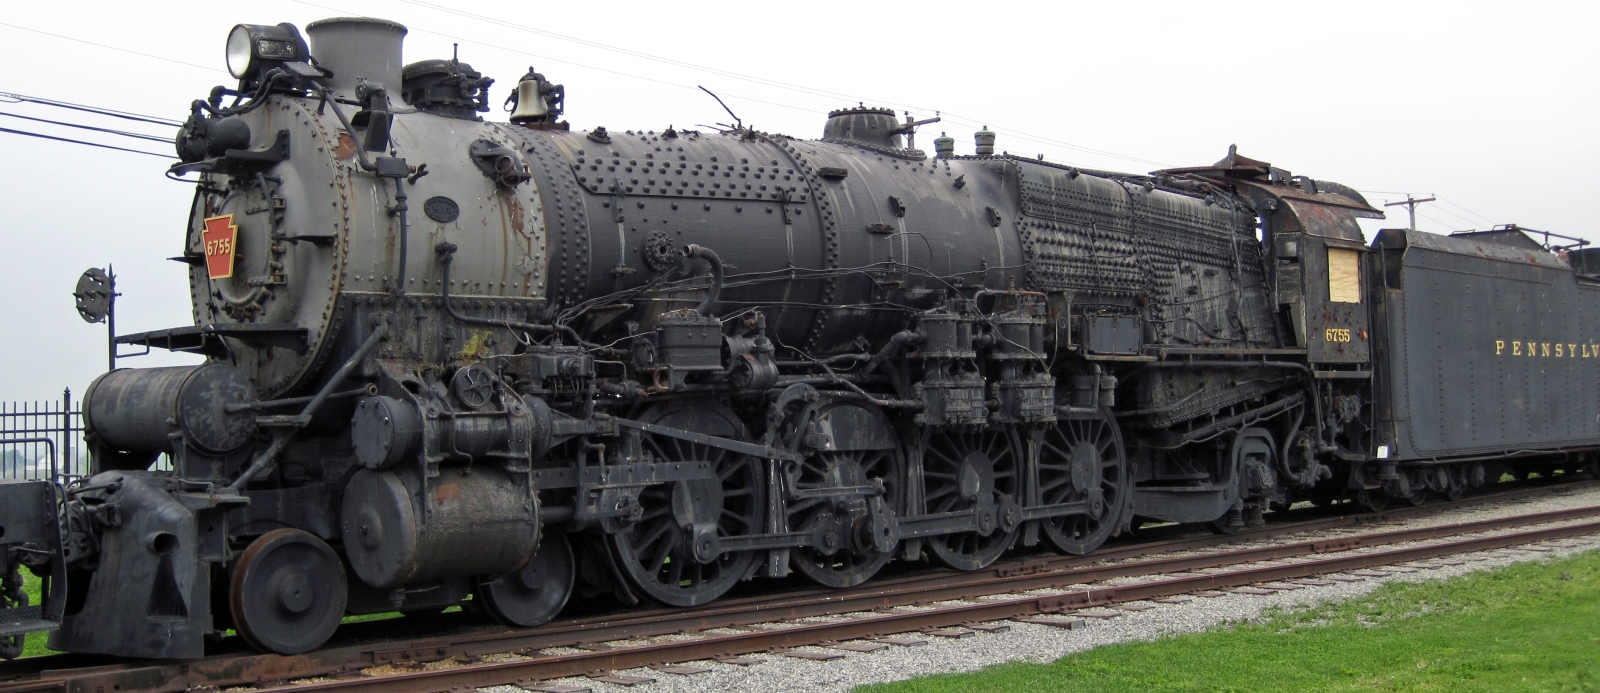 M-1b No. 6755 preserved in not very good condition